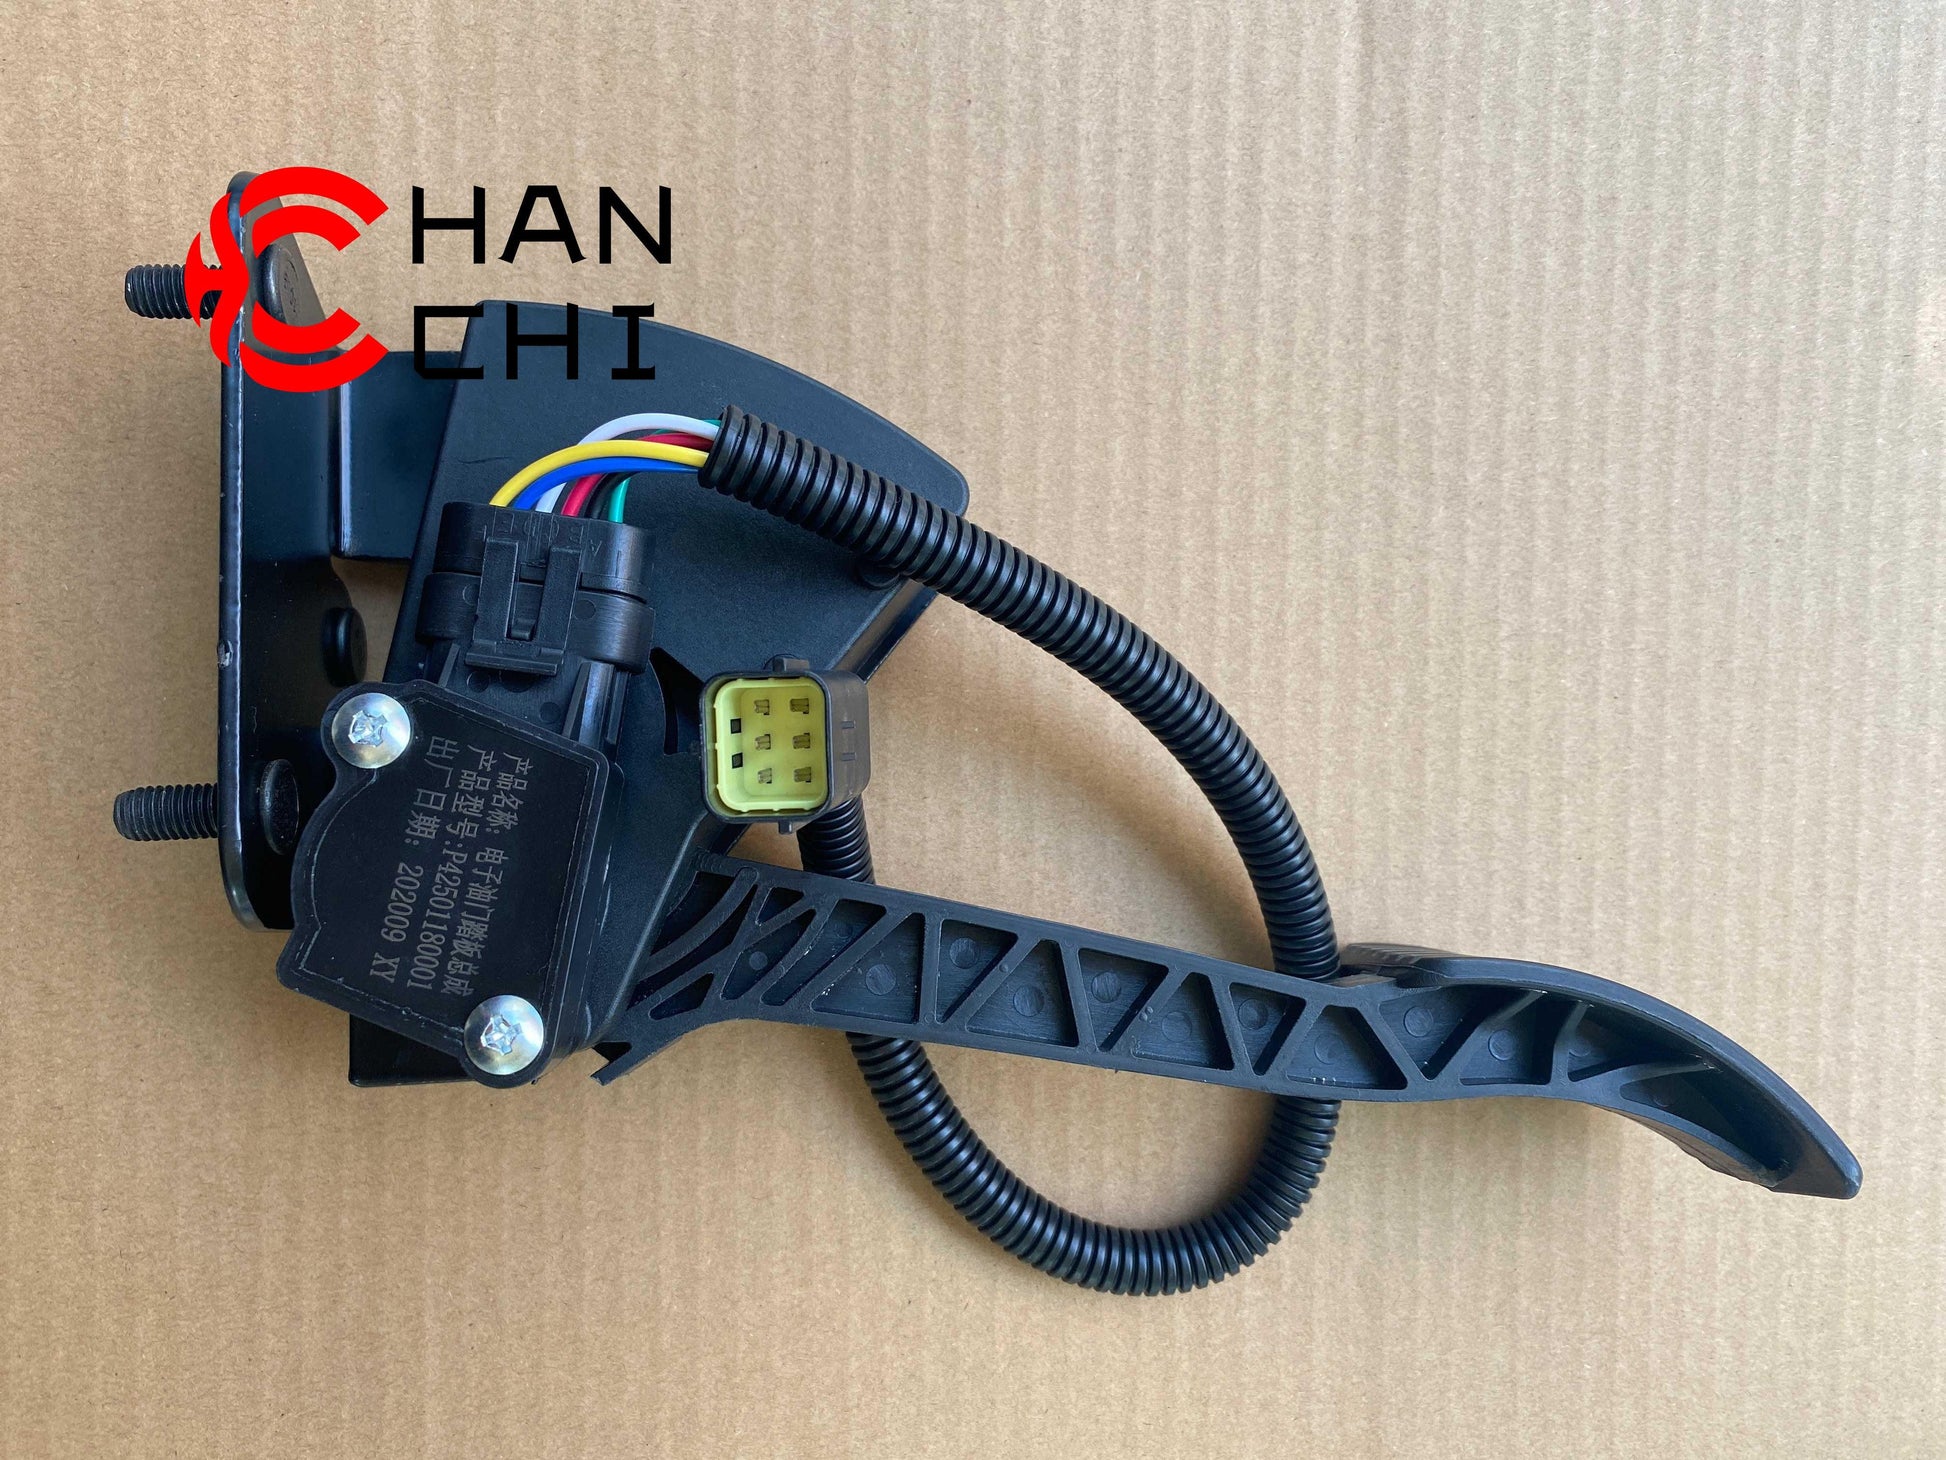 【Description】---☀Welcome to HANCHI☀---✔Good Quality✔Generally Applicability✔Competitive PriceEnjoy your shopping time↖（^ω^）↗【Features】Brand-New with High Quality for the Aftermarket.Totally mathced your need.**Stable Quality**High Precision**Easy Installation**【Specification】OEM：118AAA00001 P42501180001Material：ABSColor：blackOrigin：Made in ChinaWeight：1000g【Packing List】1* Electronic Accelerator Pedal 【More Service】 We can provide OEM service We can Be your one-step solution for Auto Parts We ca